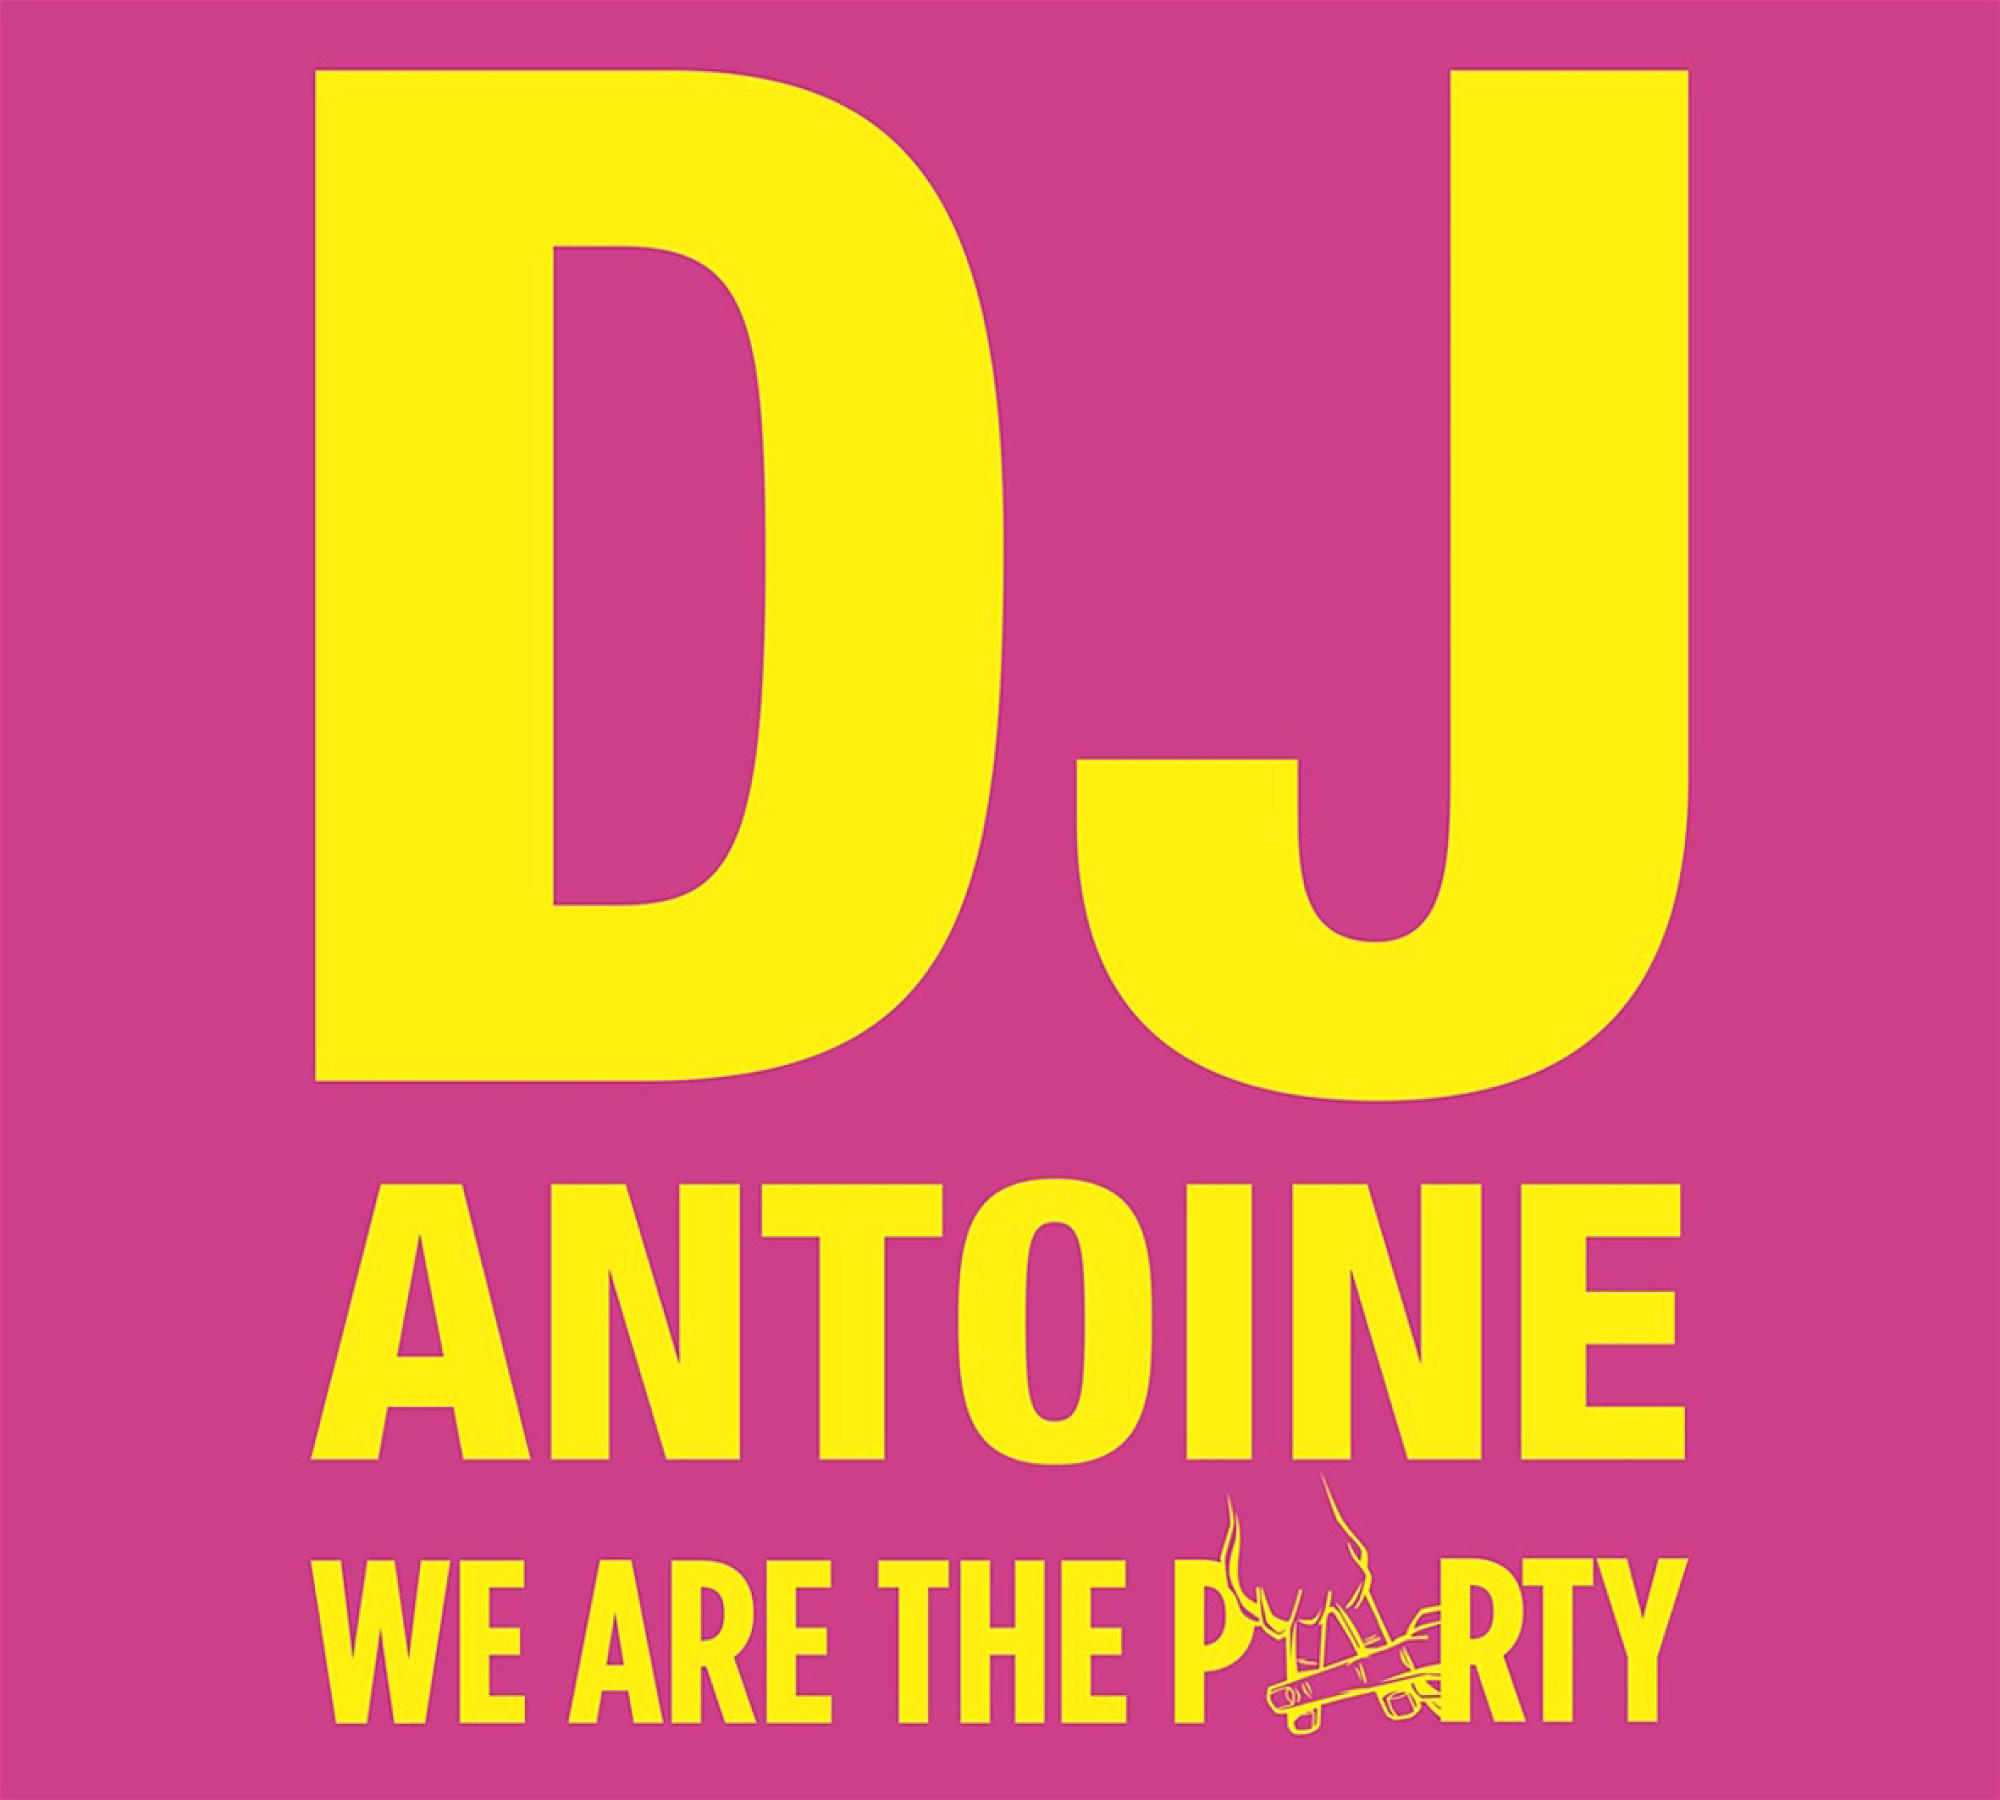 DJ Antoine - We Are (CD) (Limited) The Party 